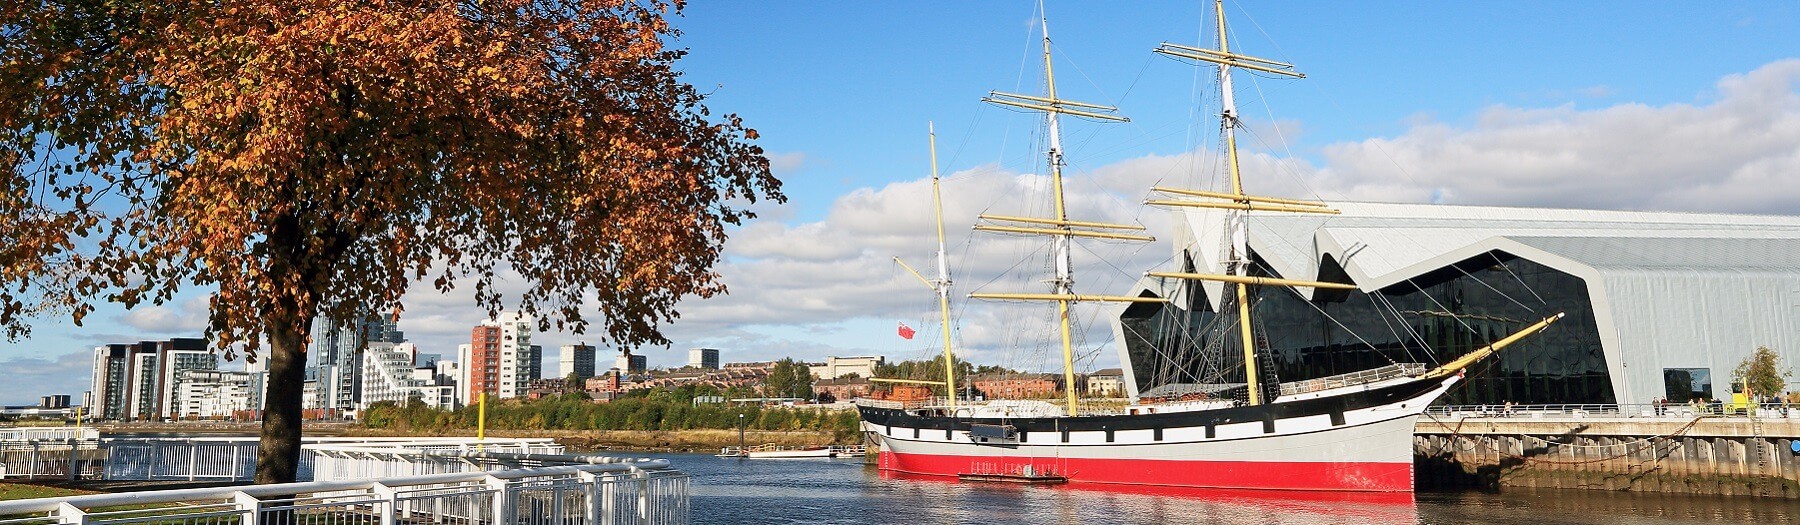 The Tall Ship at the Riverside Museum in Glasgow